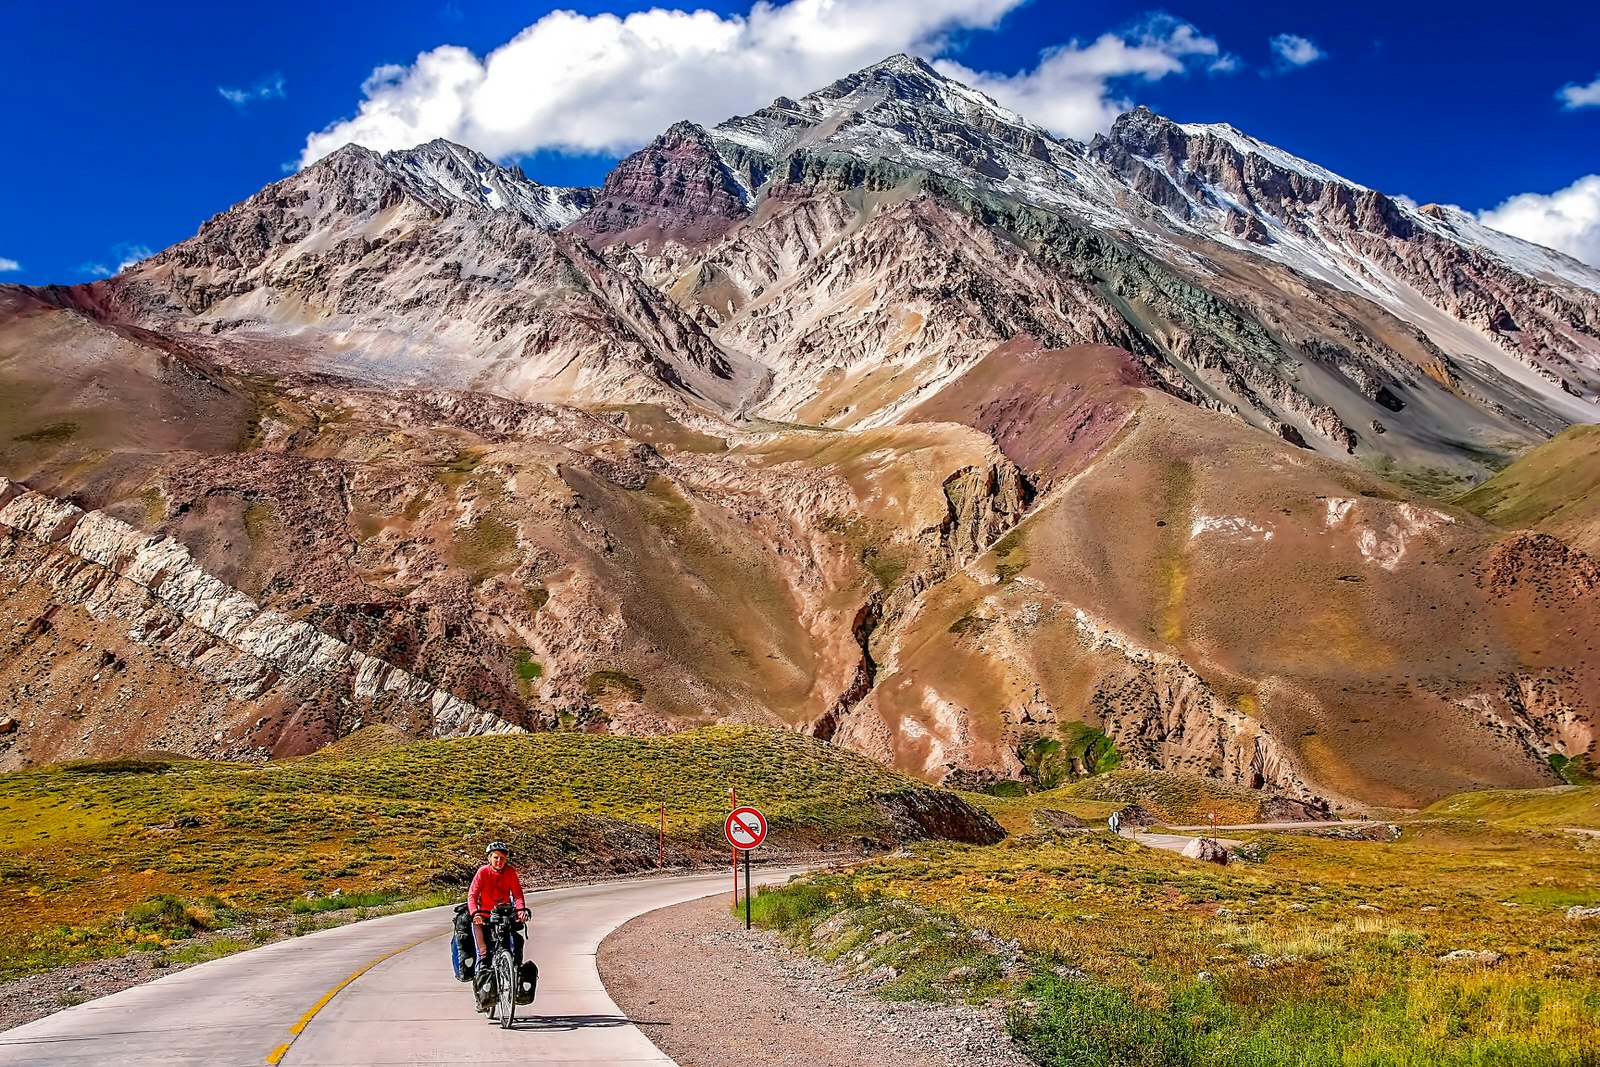 A cyclist, with bike laden with bags, cycles along a bending road beneath multi-coloured mountains.